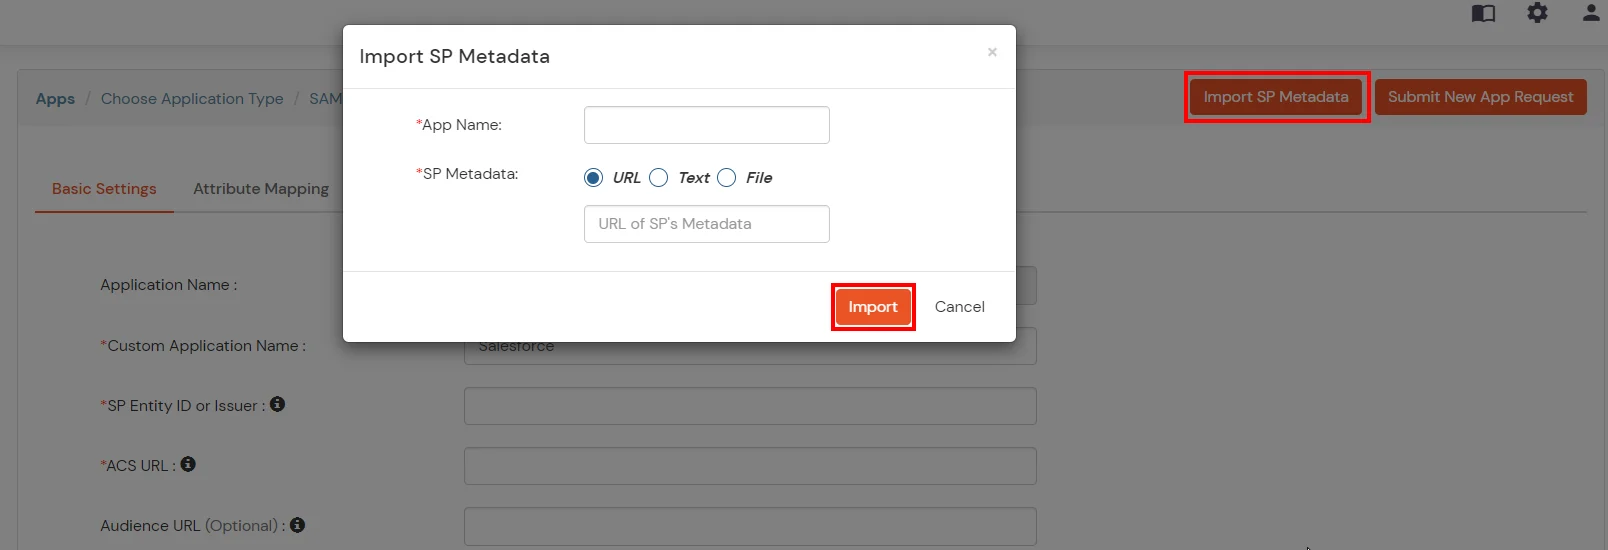 Fortify SSC Single Sign-On (SSO) Upload SP Metadata File in miniOrange Dashboard